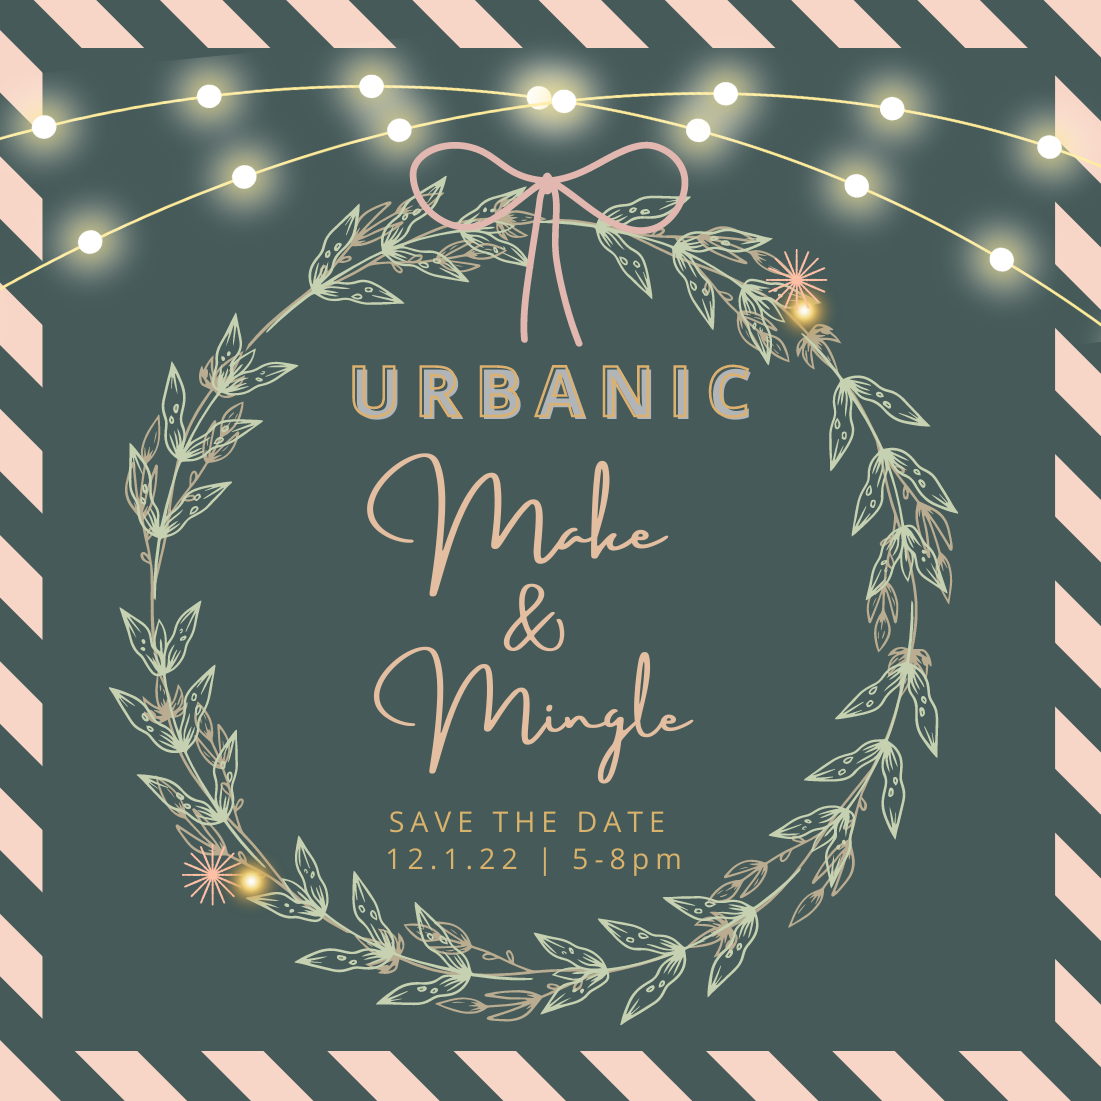 urbanic paper boutique los angeles make and mingle holiday party invitation save the date